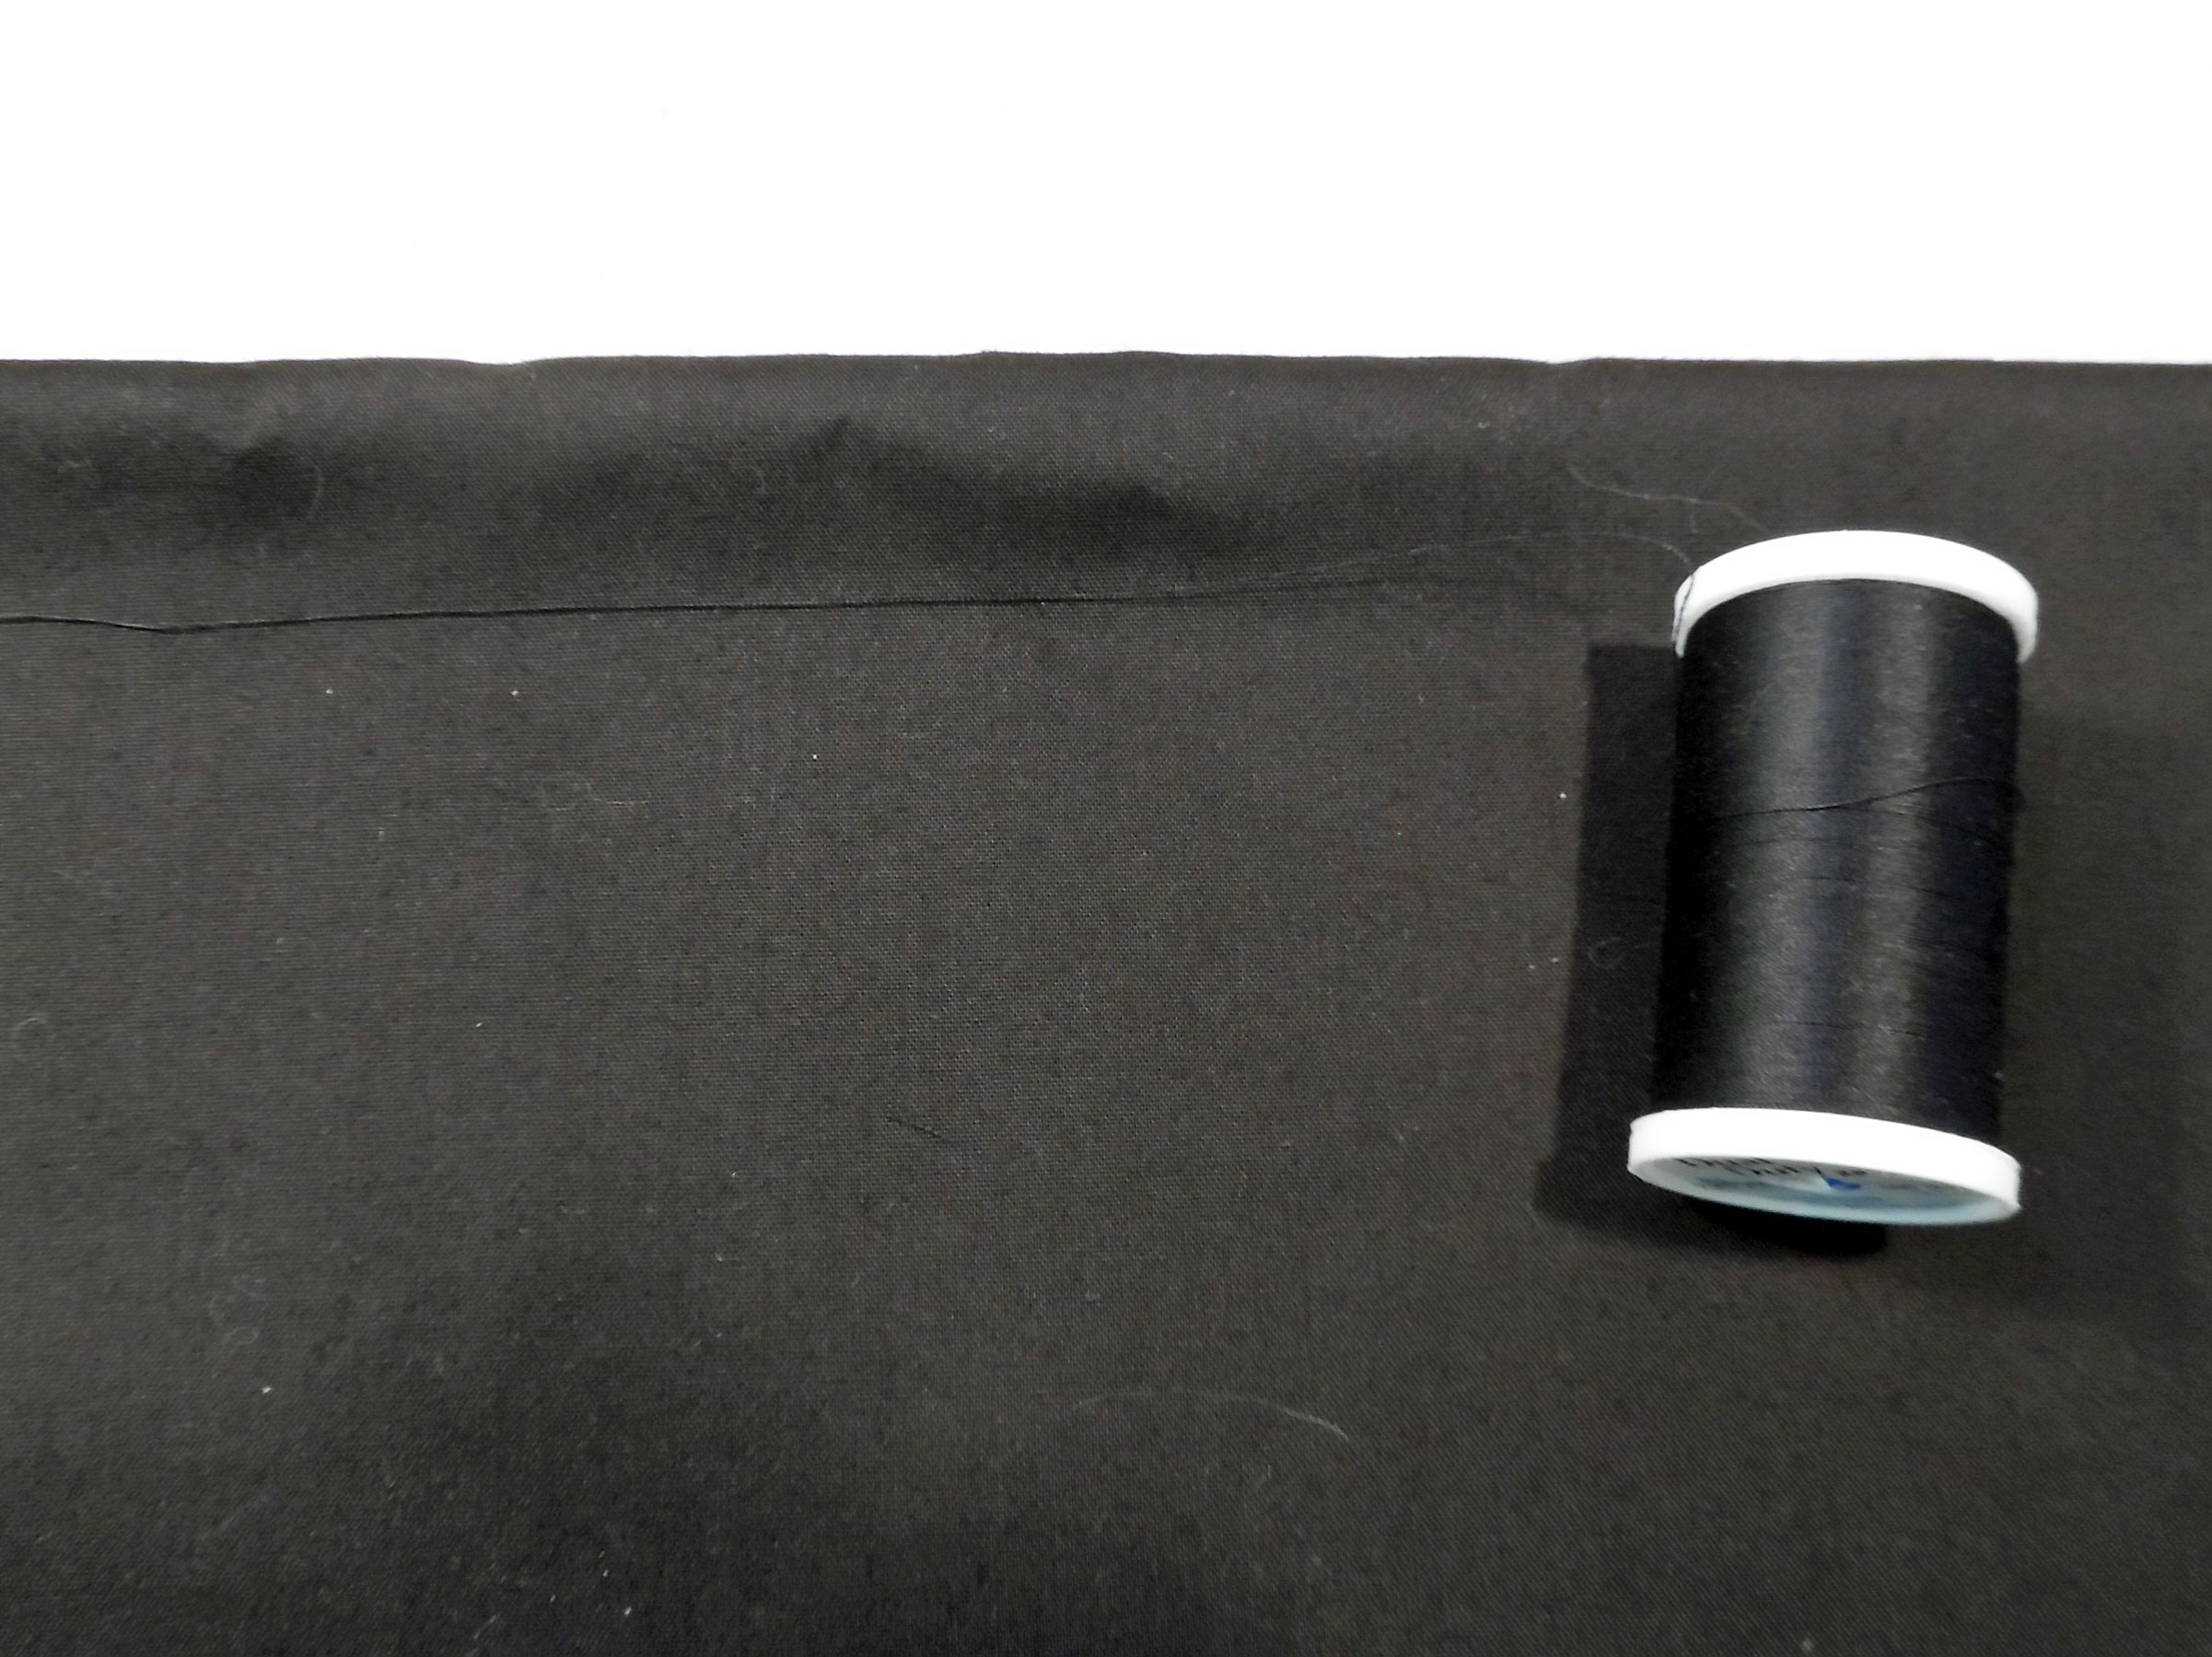 Sewing With Black Fabric